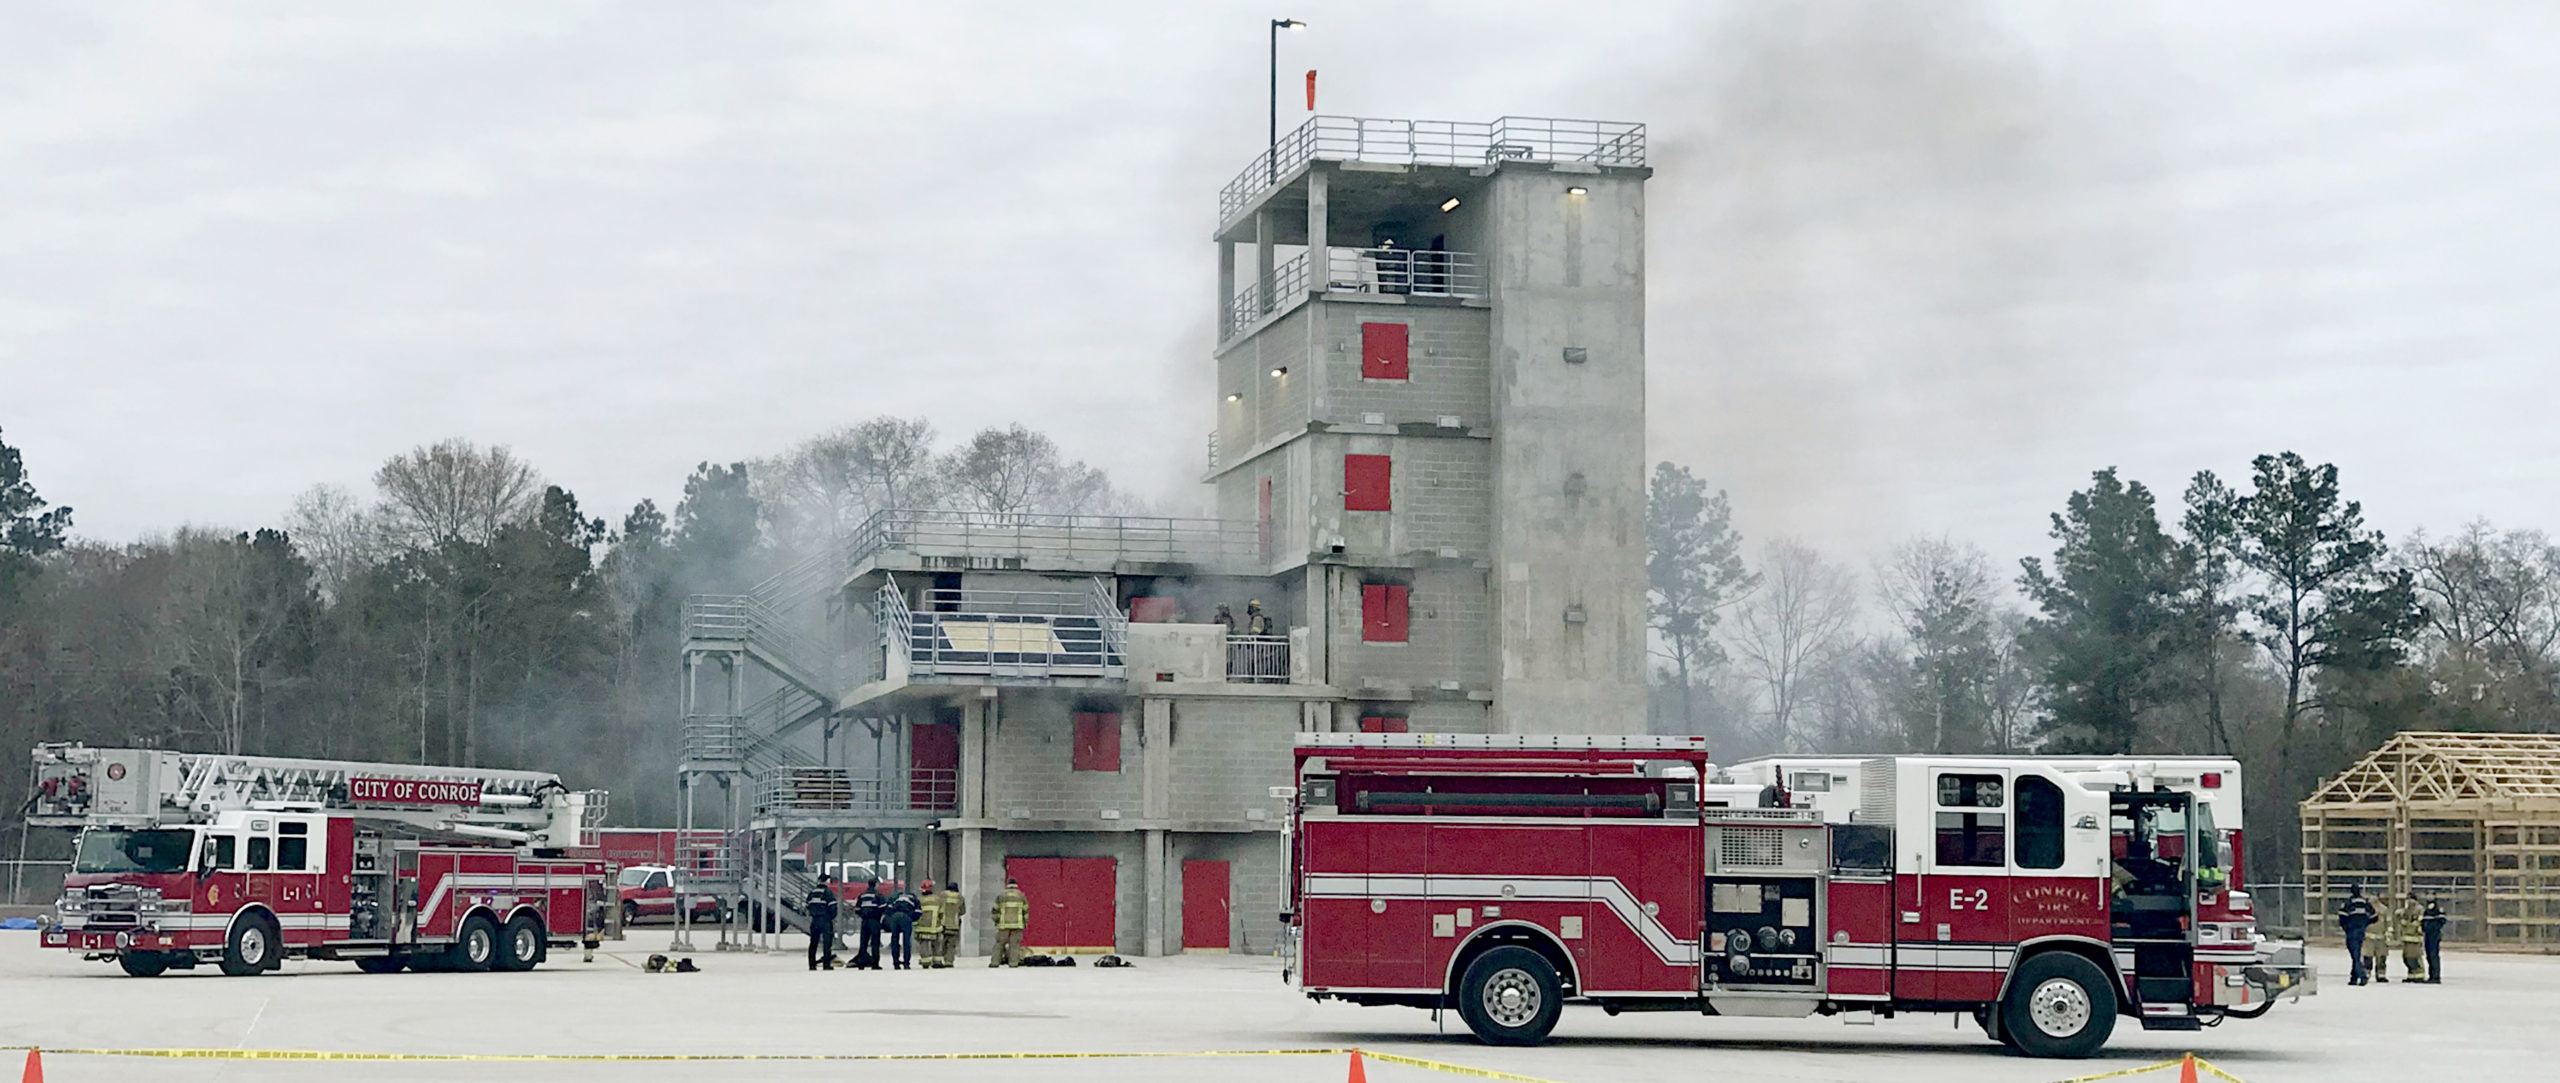 fire training facility in action Sized Posts scaled